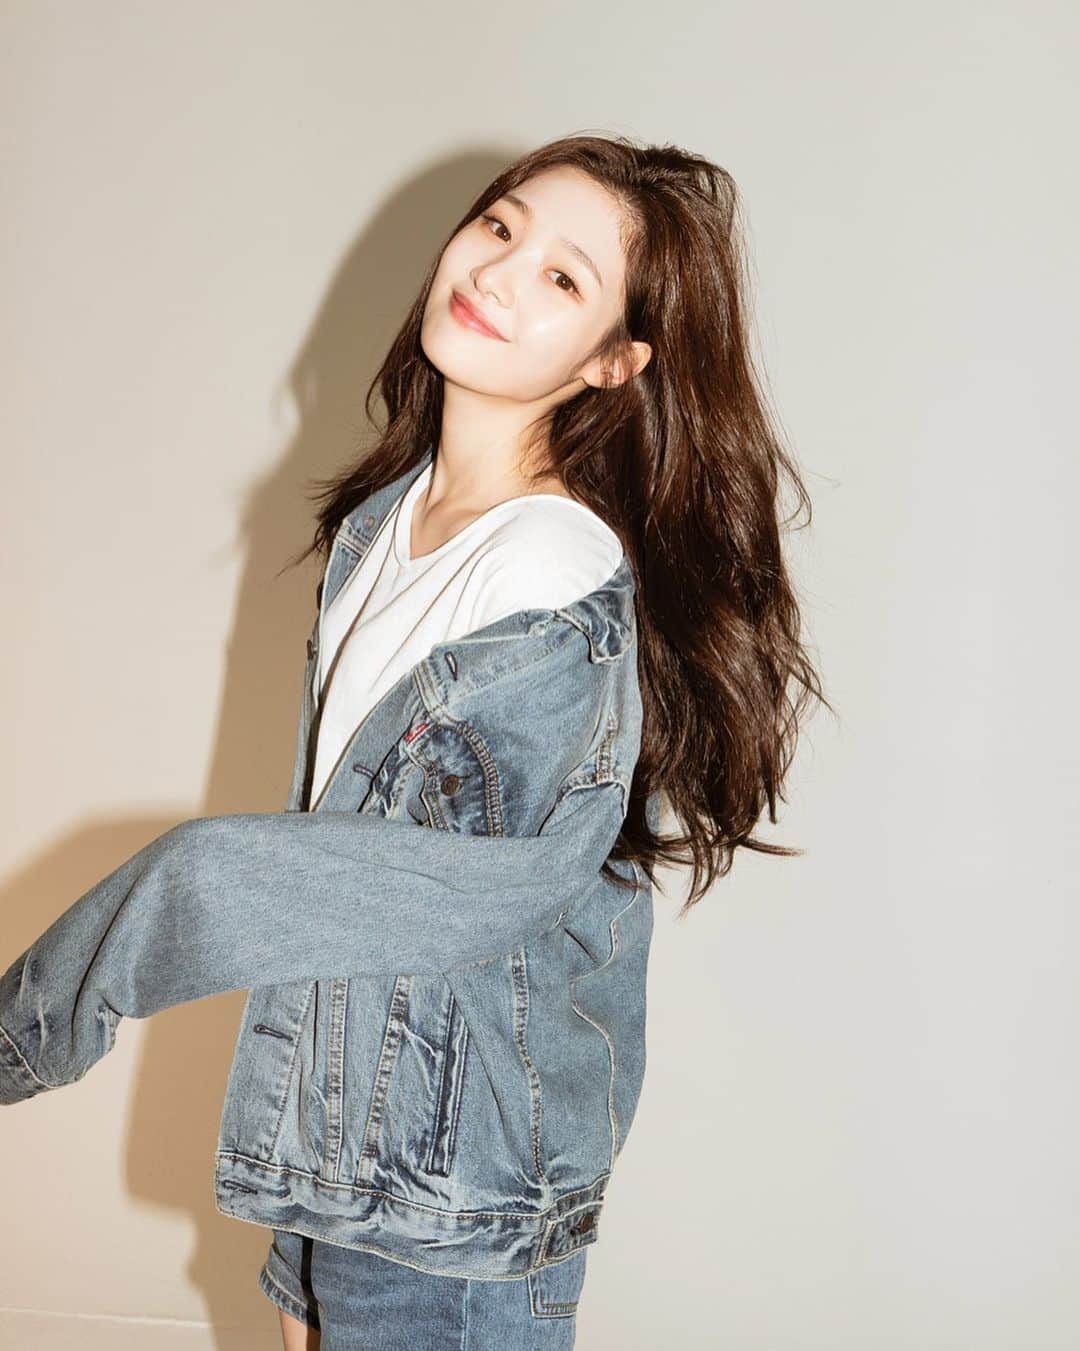 Chaeyeon (DIA) - Biography, Profile, Facts, and Career